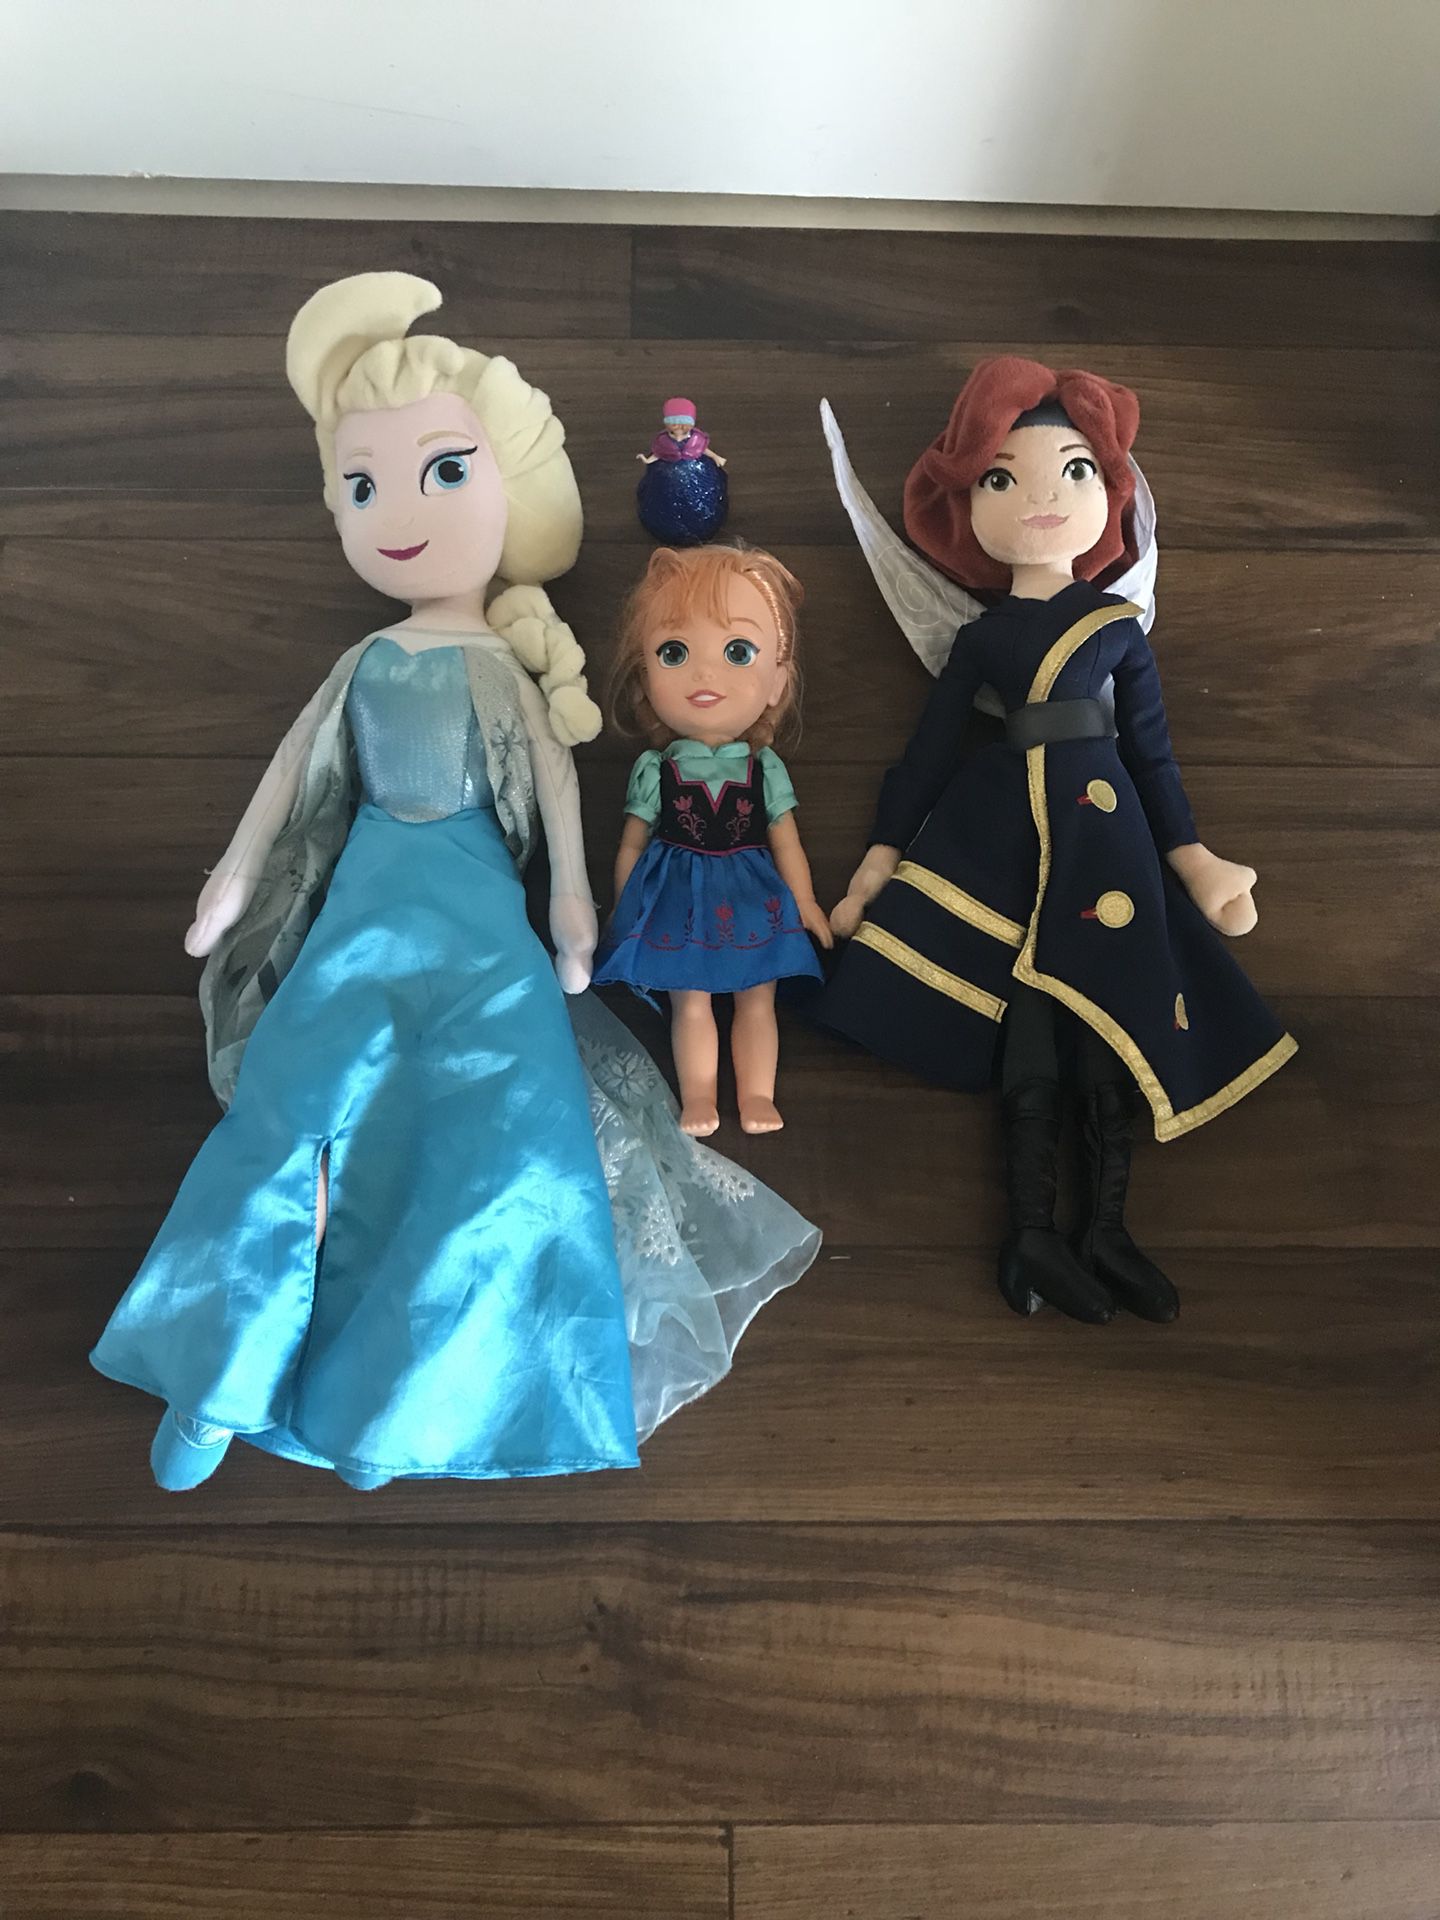 Queen Elsa, Princess Anna and flying fairy from tinker Bell the movie.